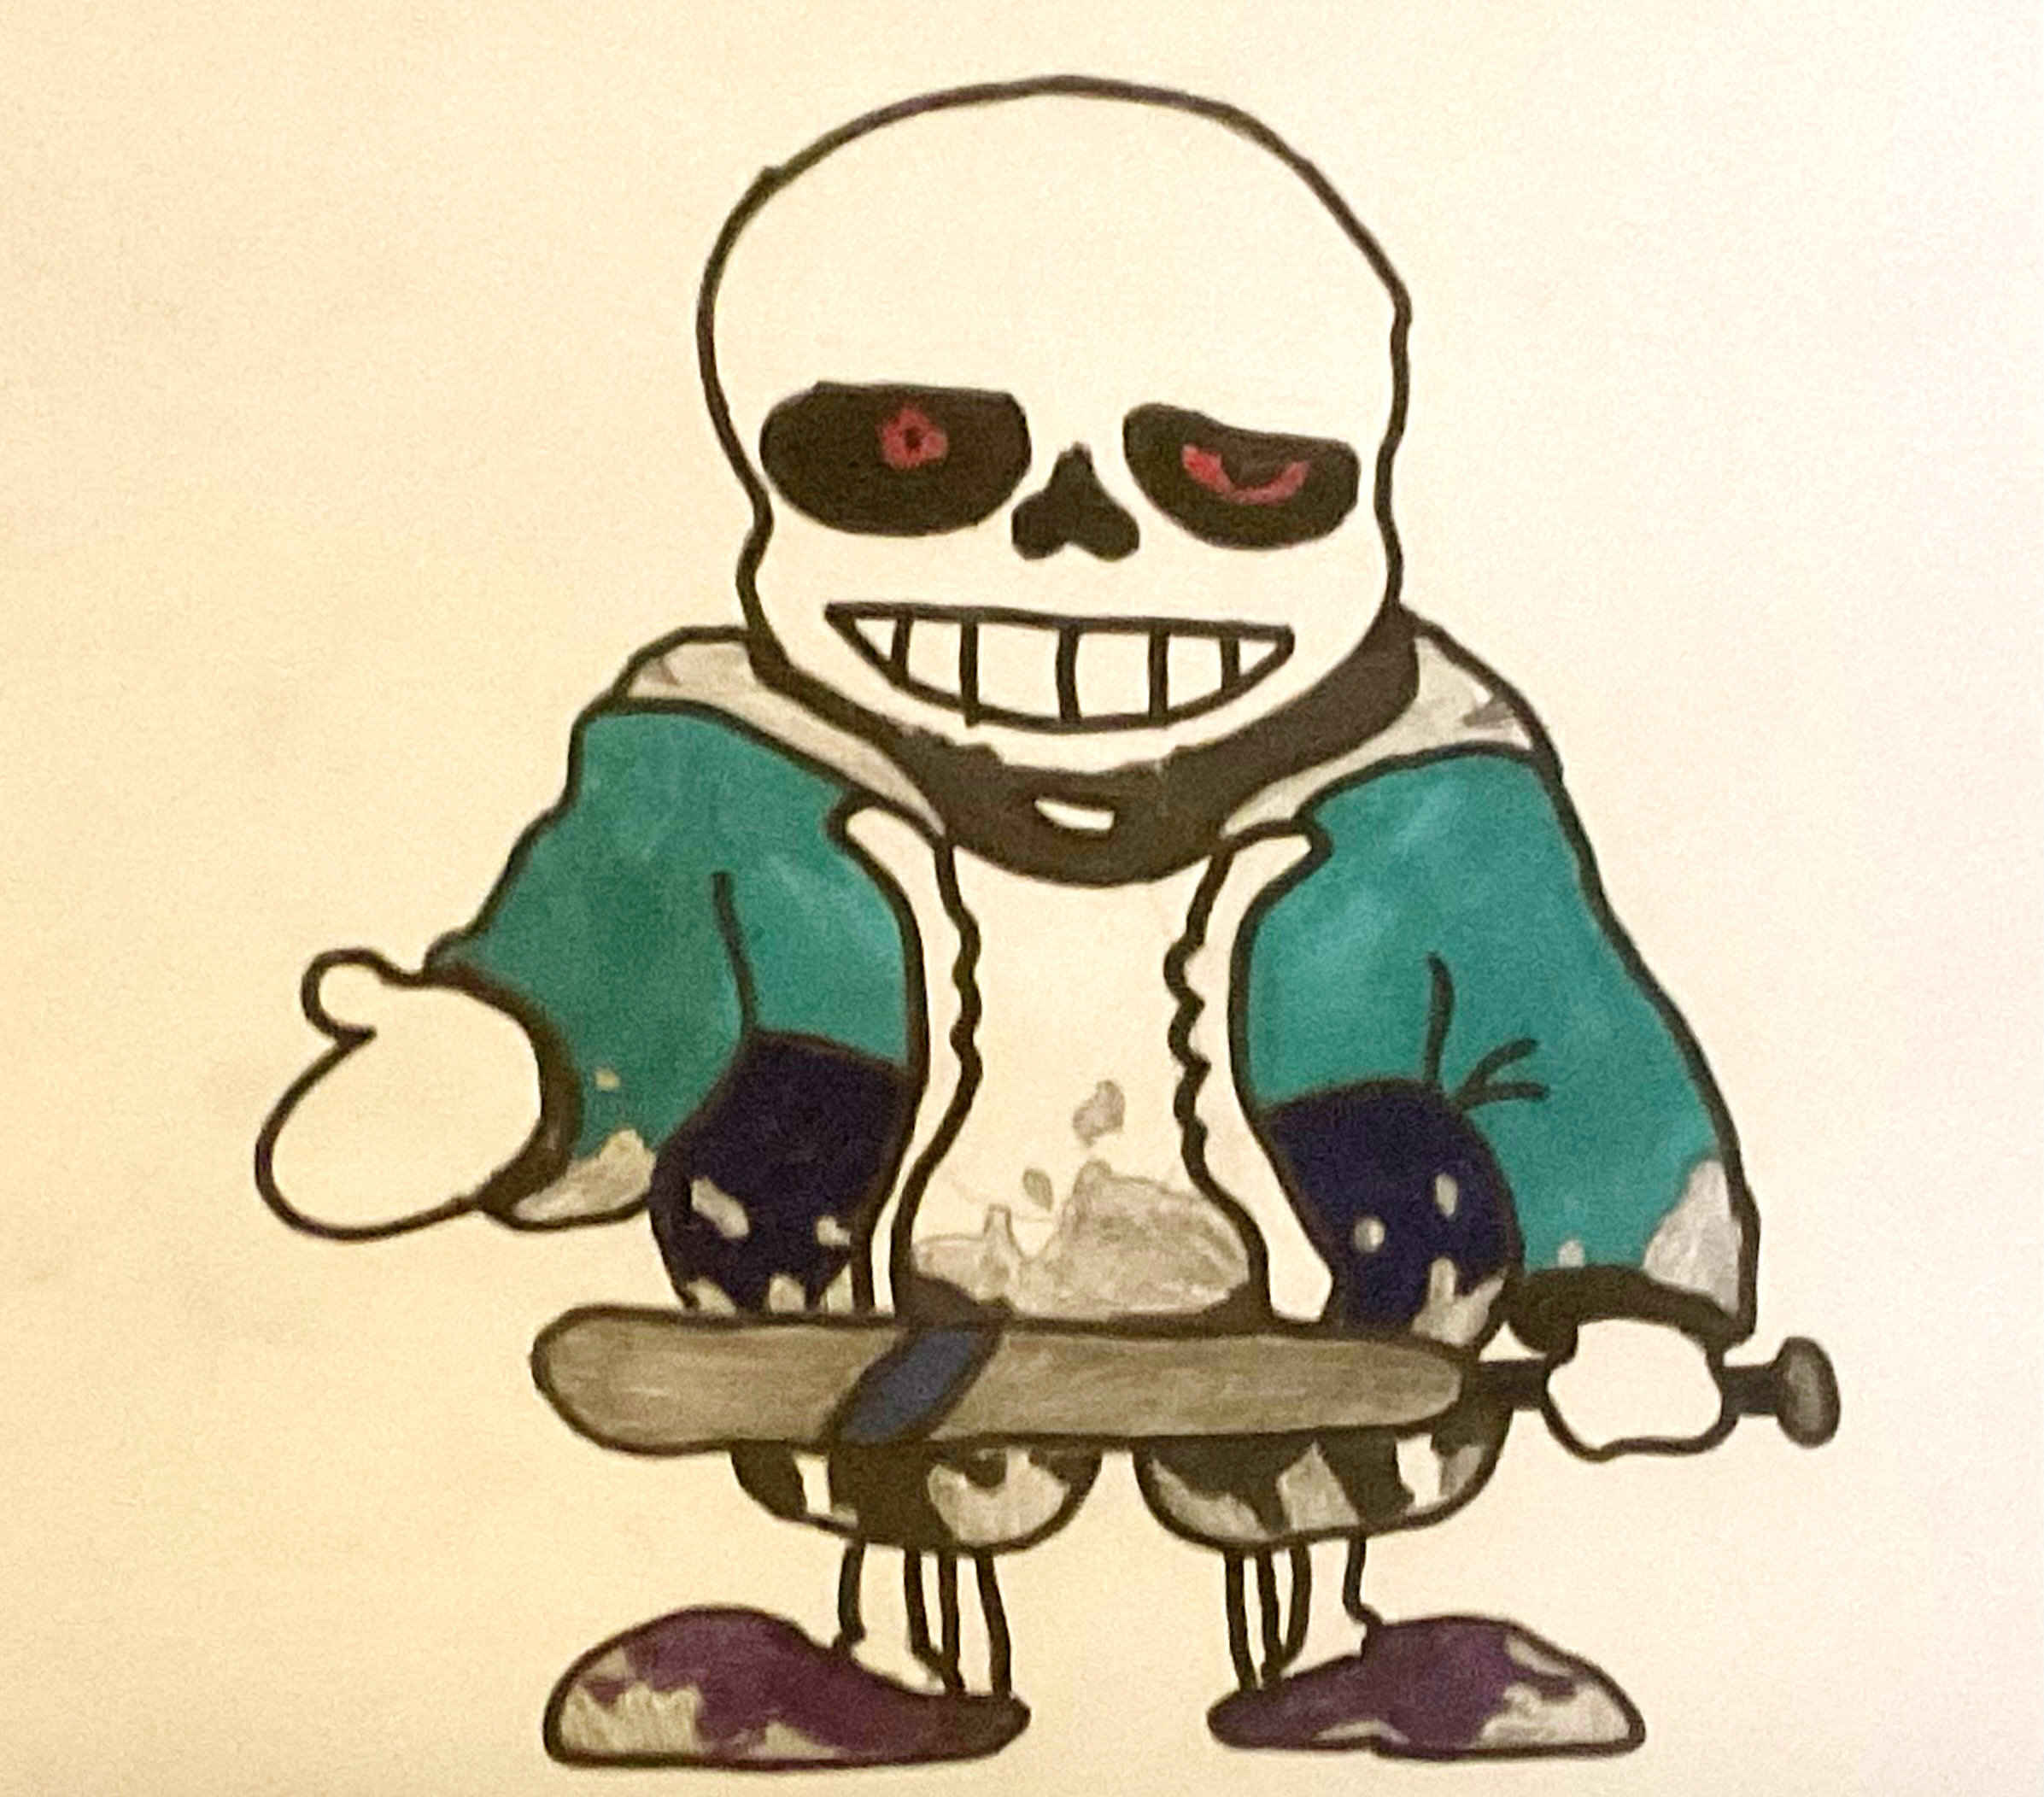 Undertale collapsed sans fight final attack (the fight is really